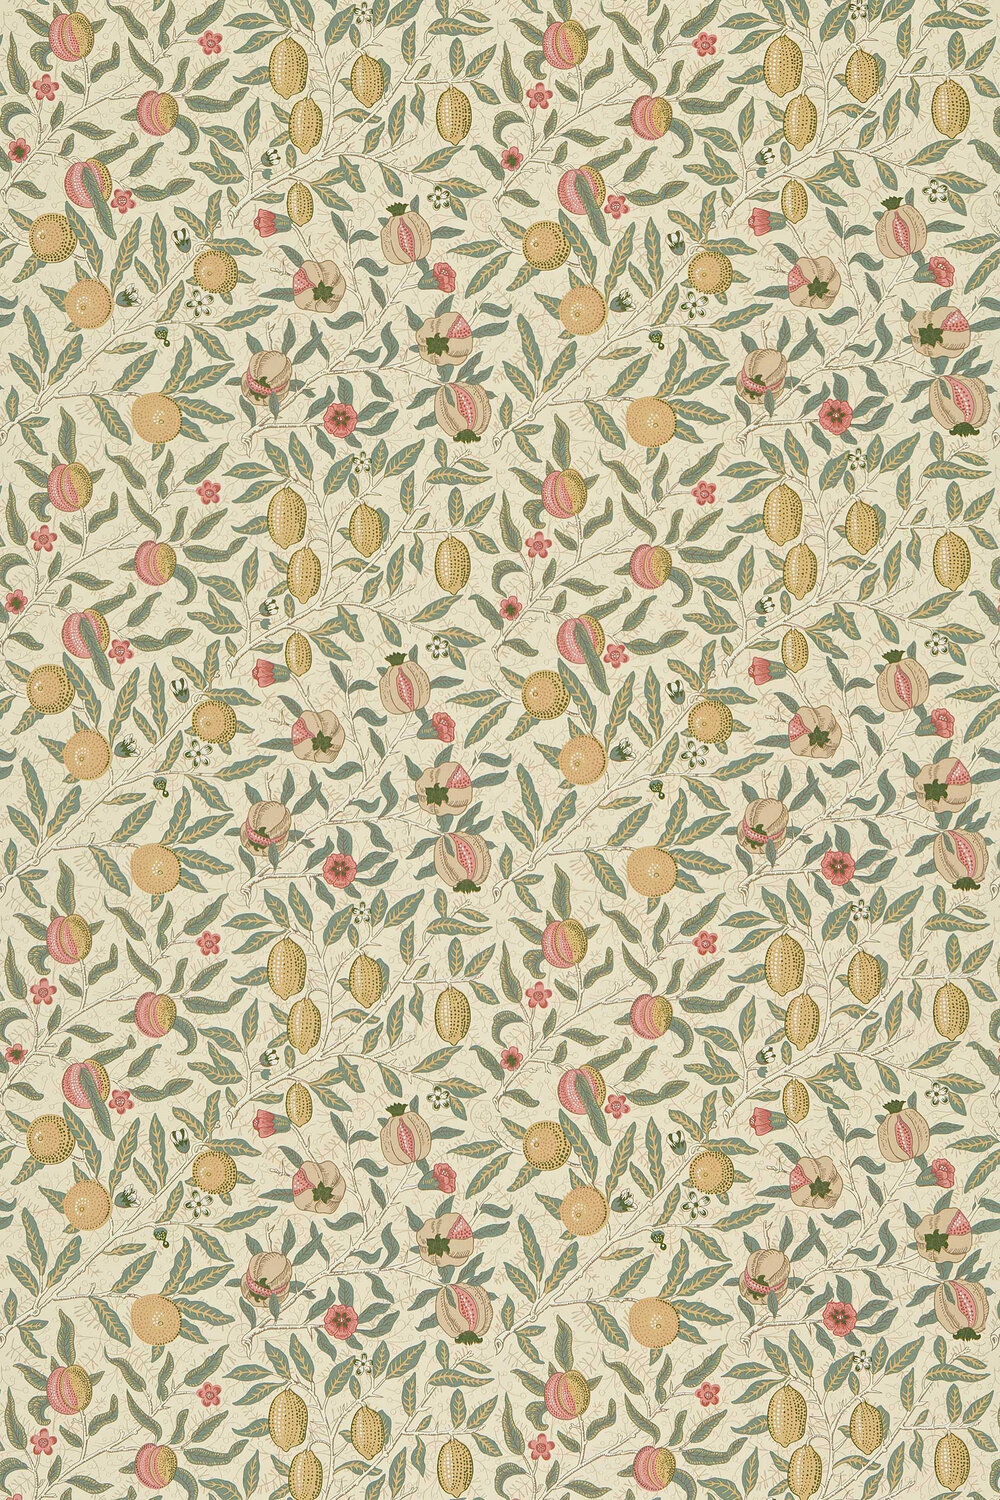 Fruit Fabric - Ivory / Teal - by Morris